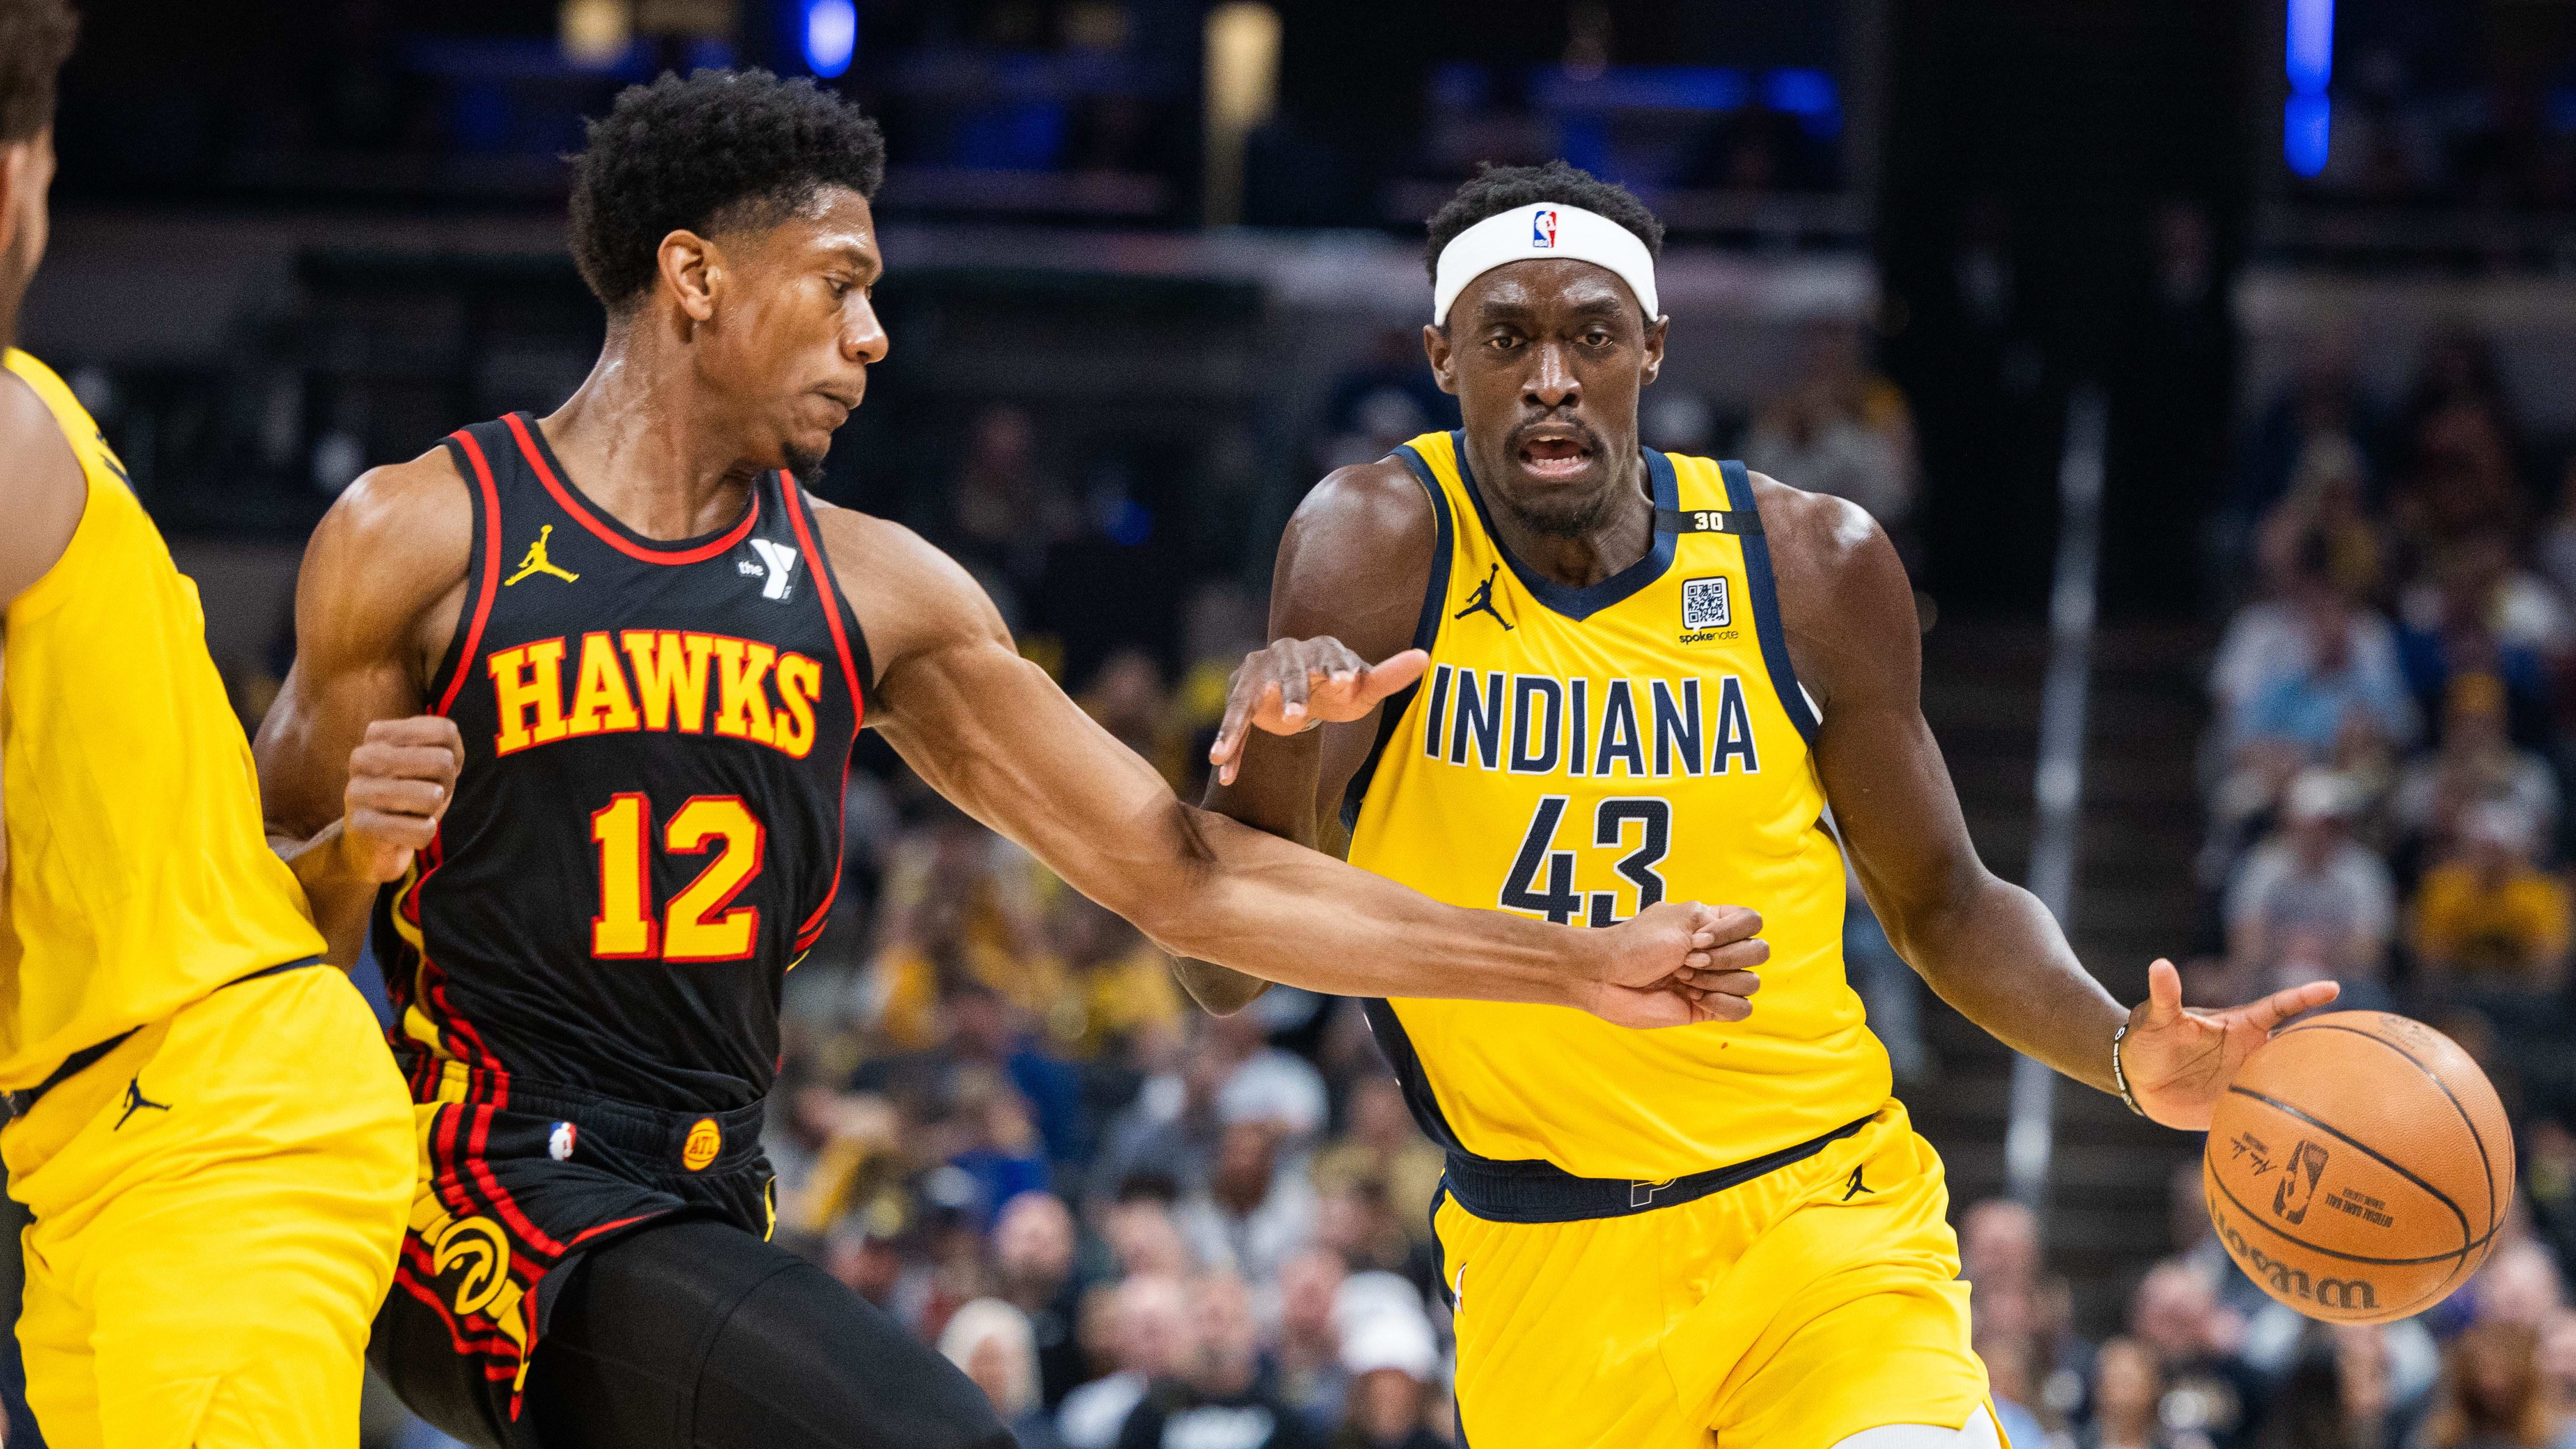 Atlanta Gives Up 157 Points in Season Finale to Indiana; Will Face Chicago In NBA Play In Tournament Wednesday